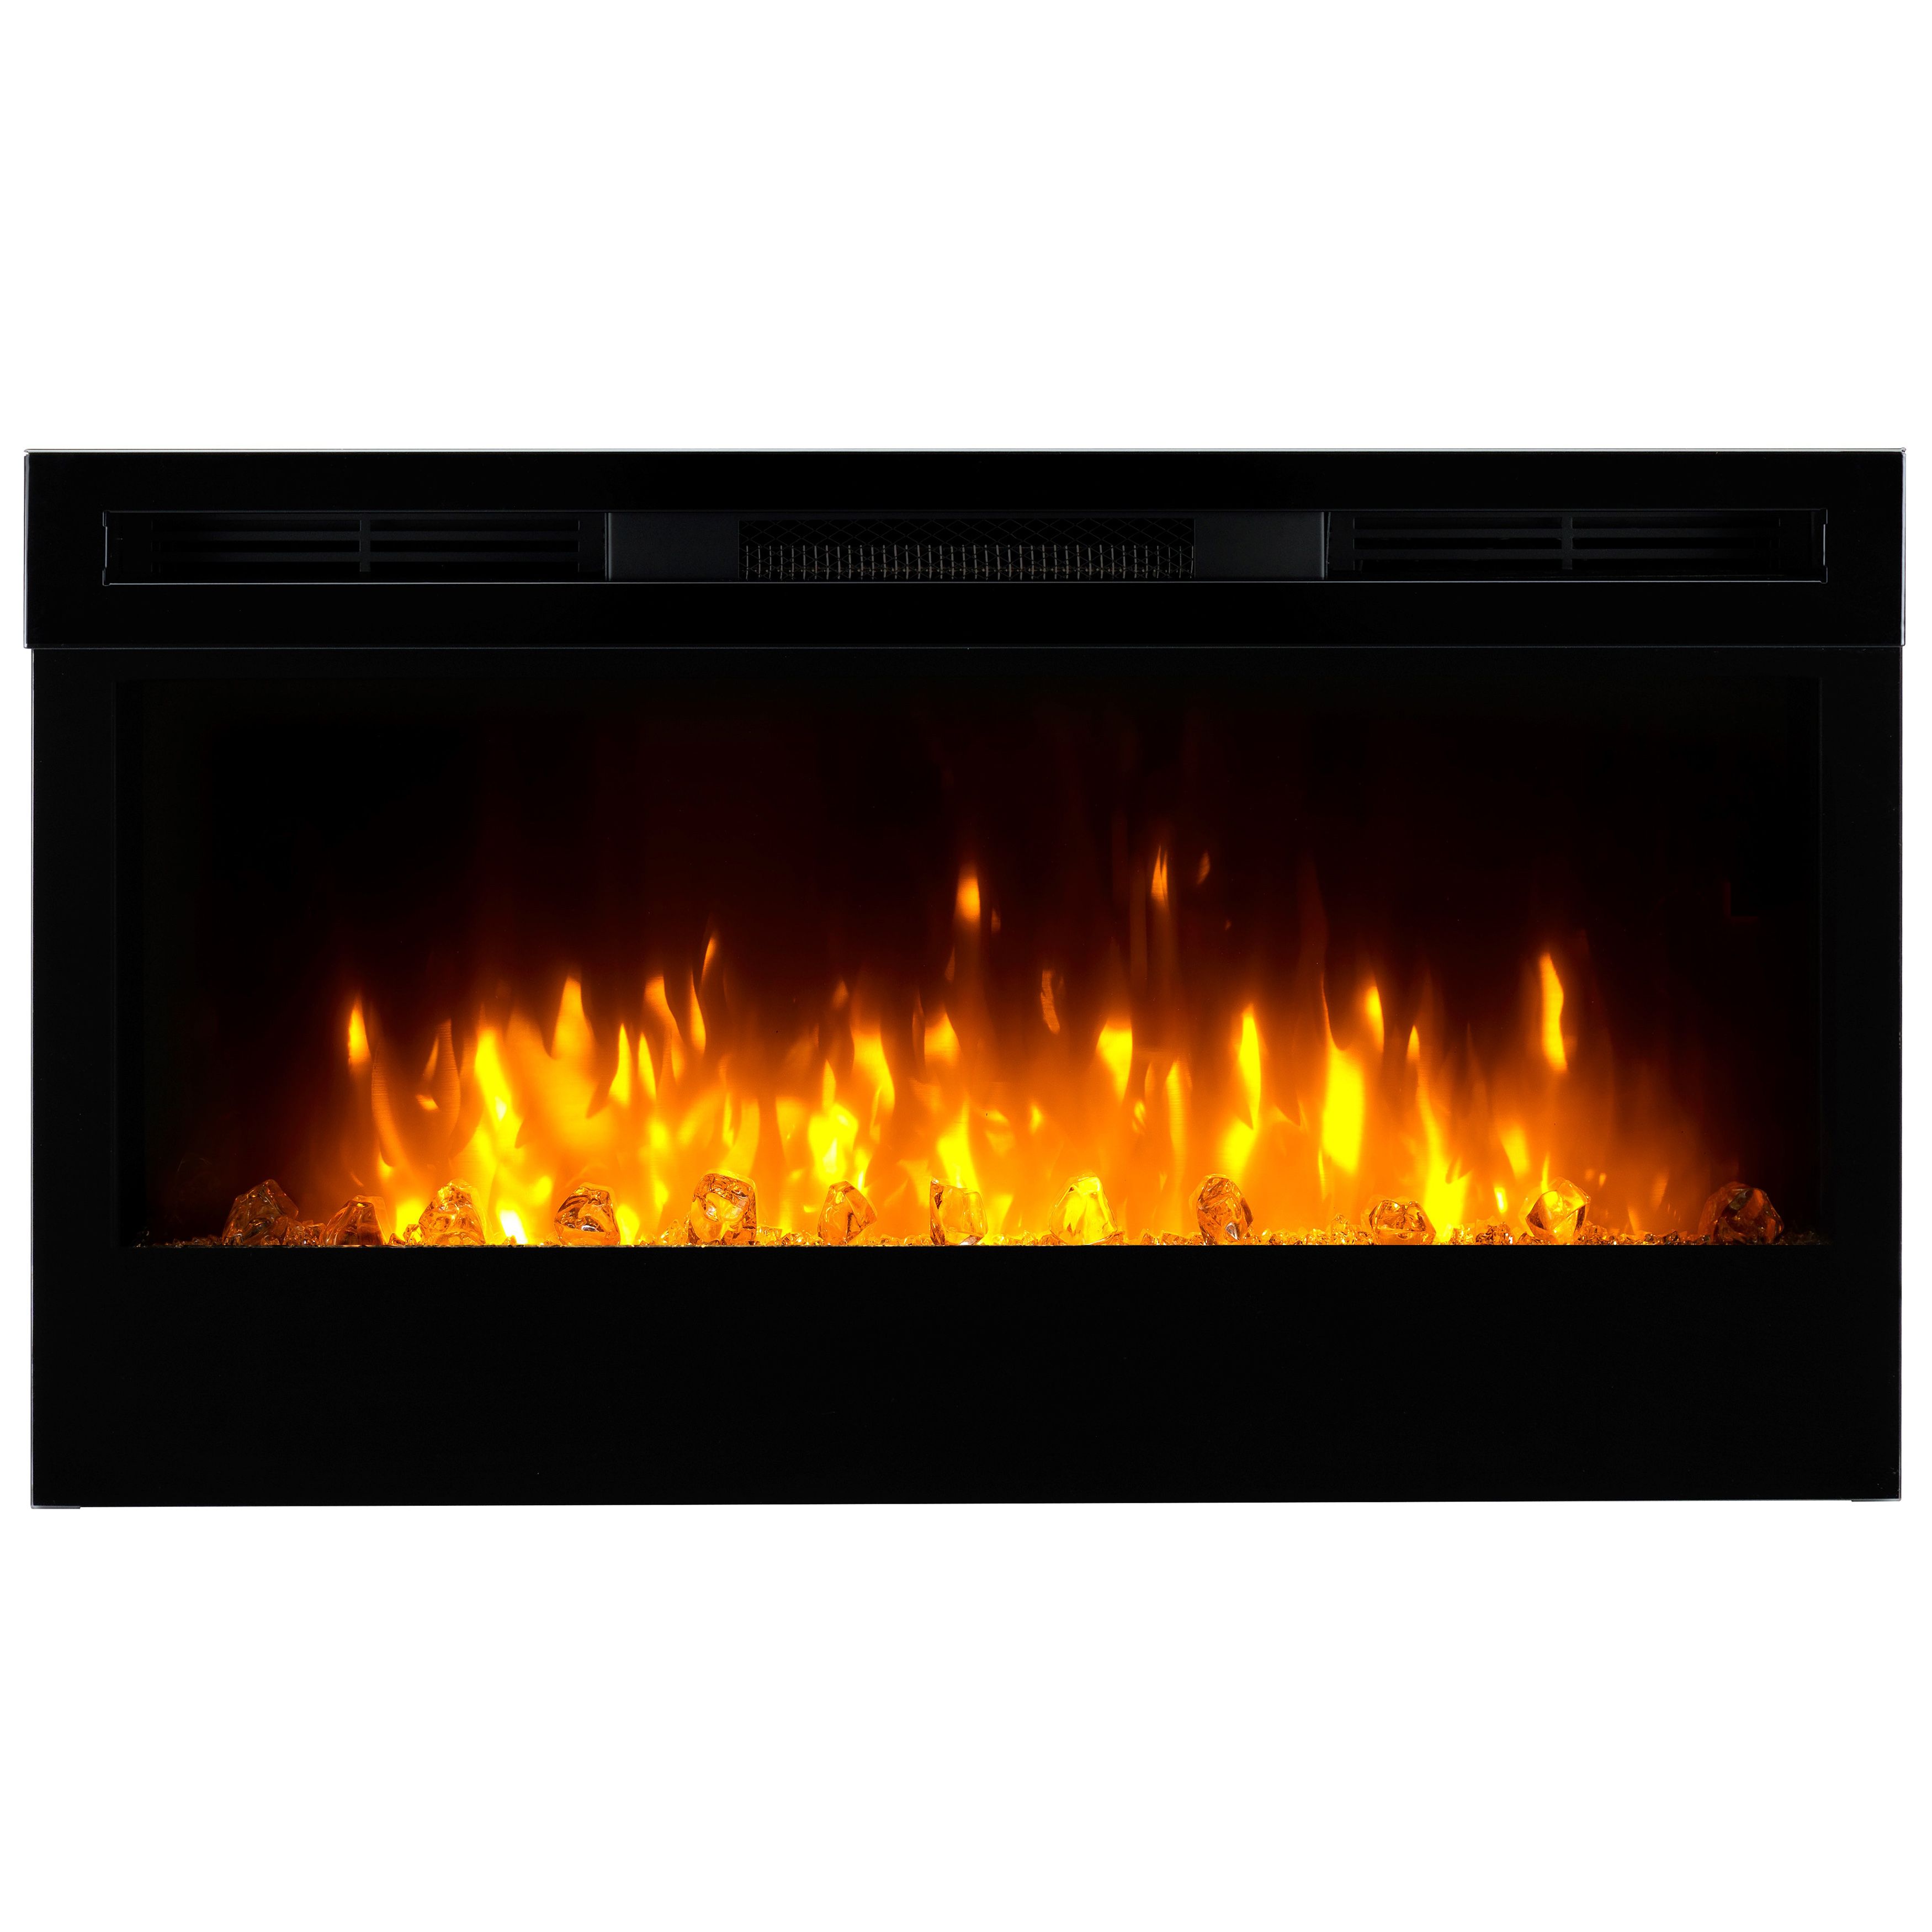 Dimplex Prism 34 1.1kW Gloss Black Glass effect Electric Fire